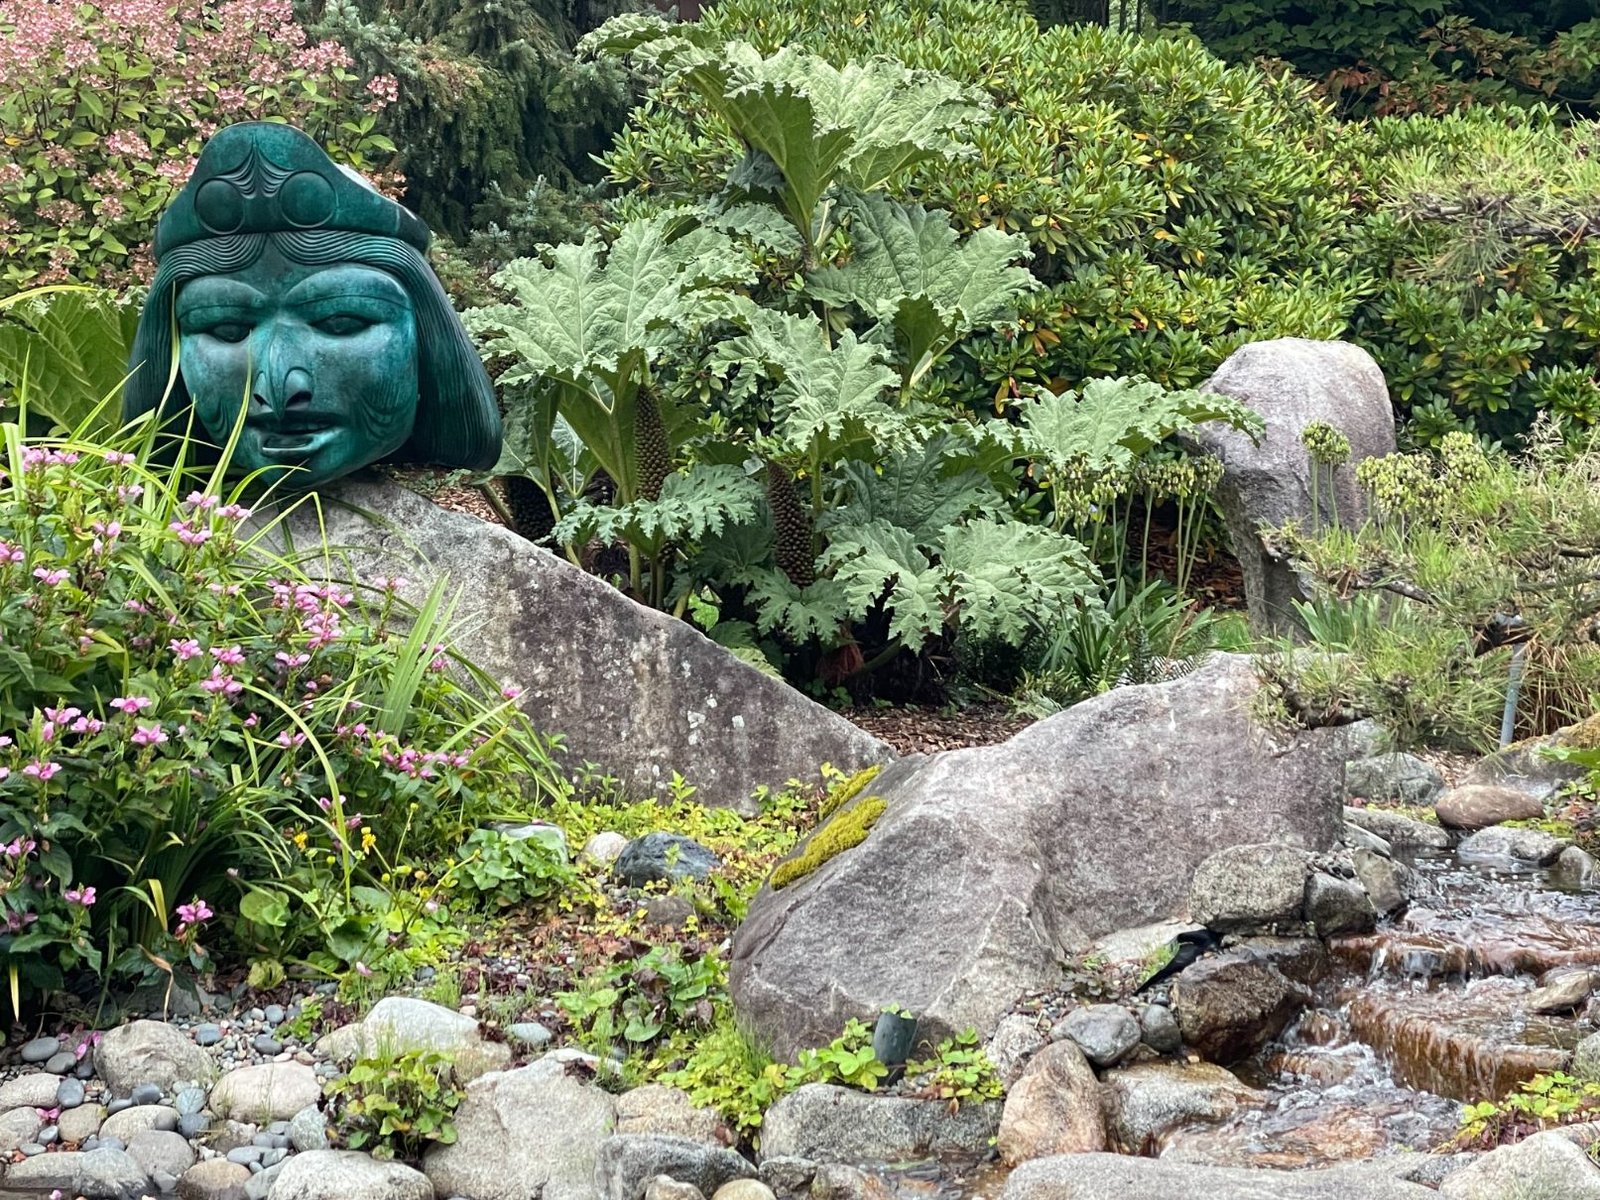 Stroll the gardens at Willows Lodge and discover art everywhere